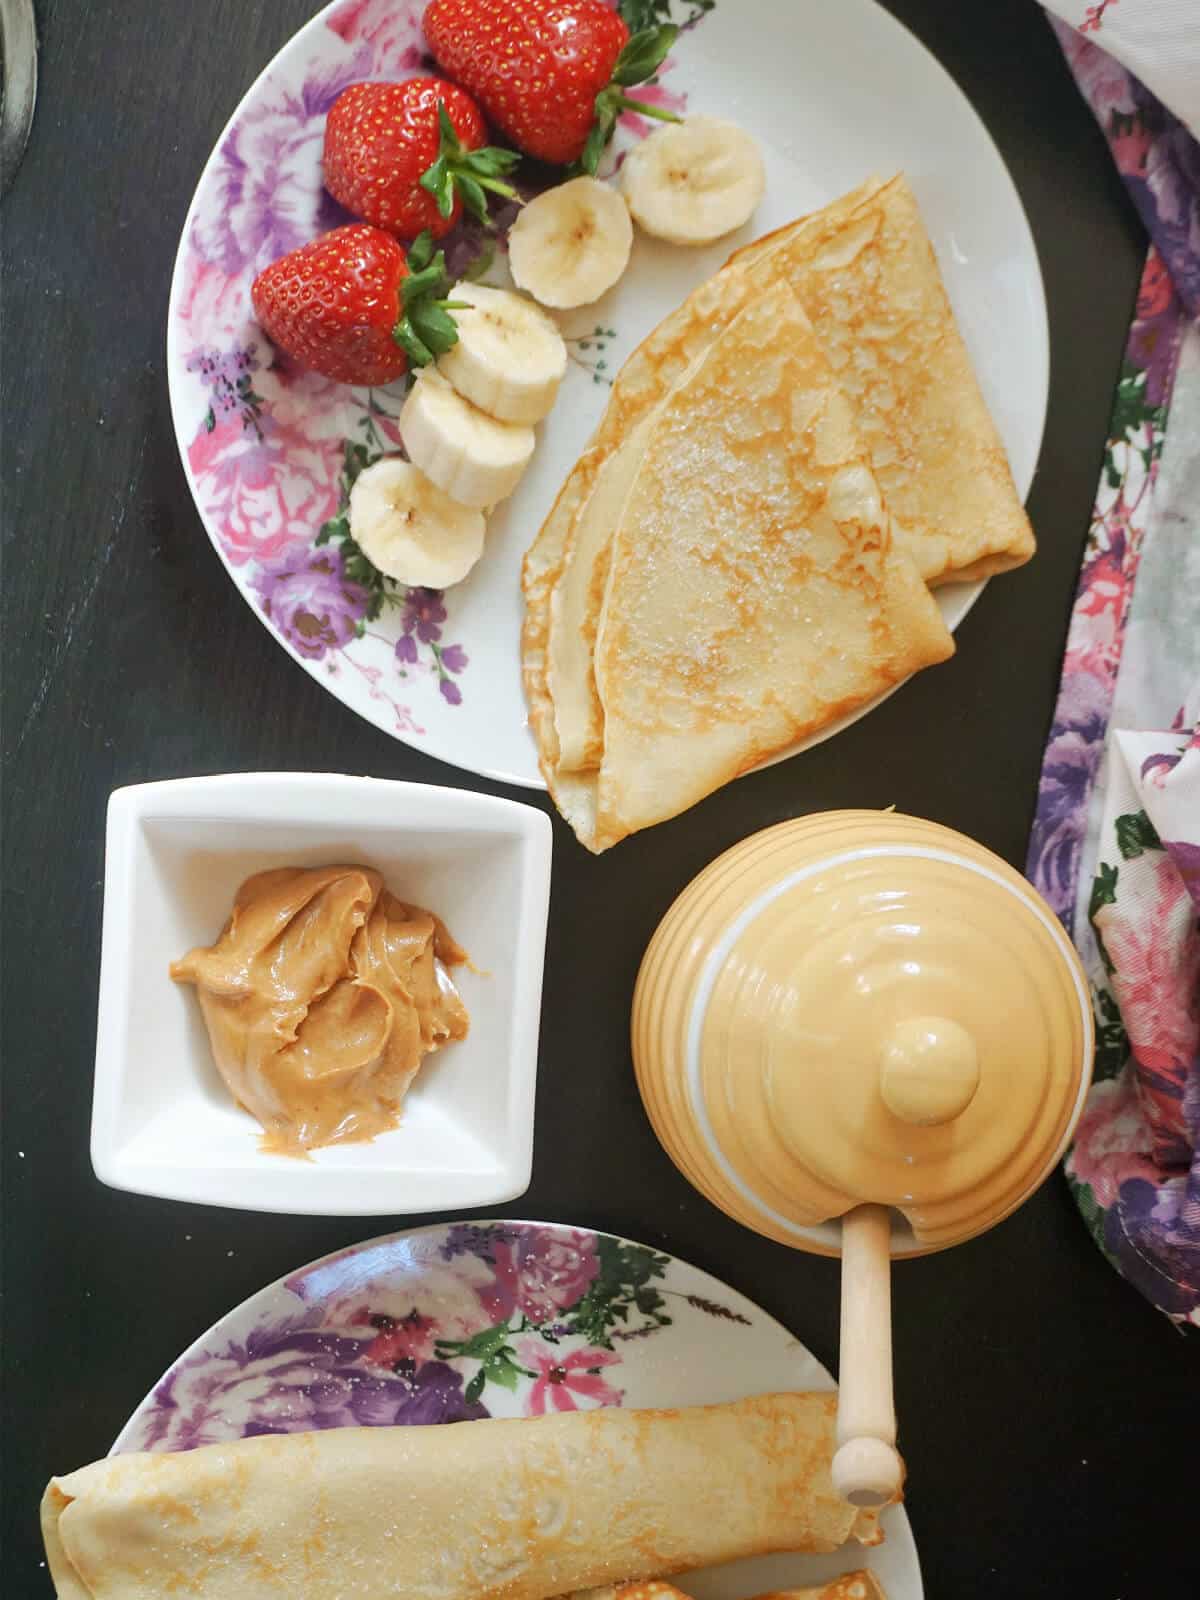 A white plate with 2 crepes, banana slices and strawberries, a ramekin with peanut butter, a honey oot and another plate with more crepes